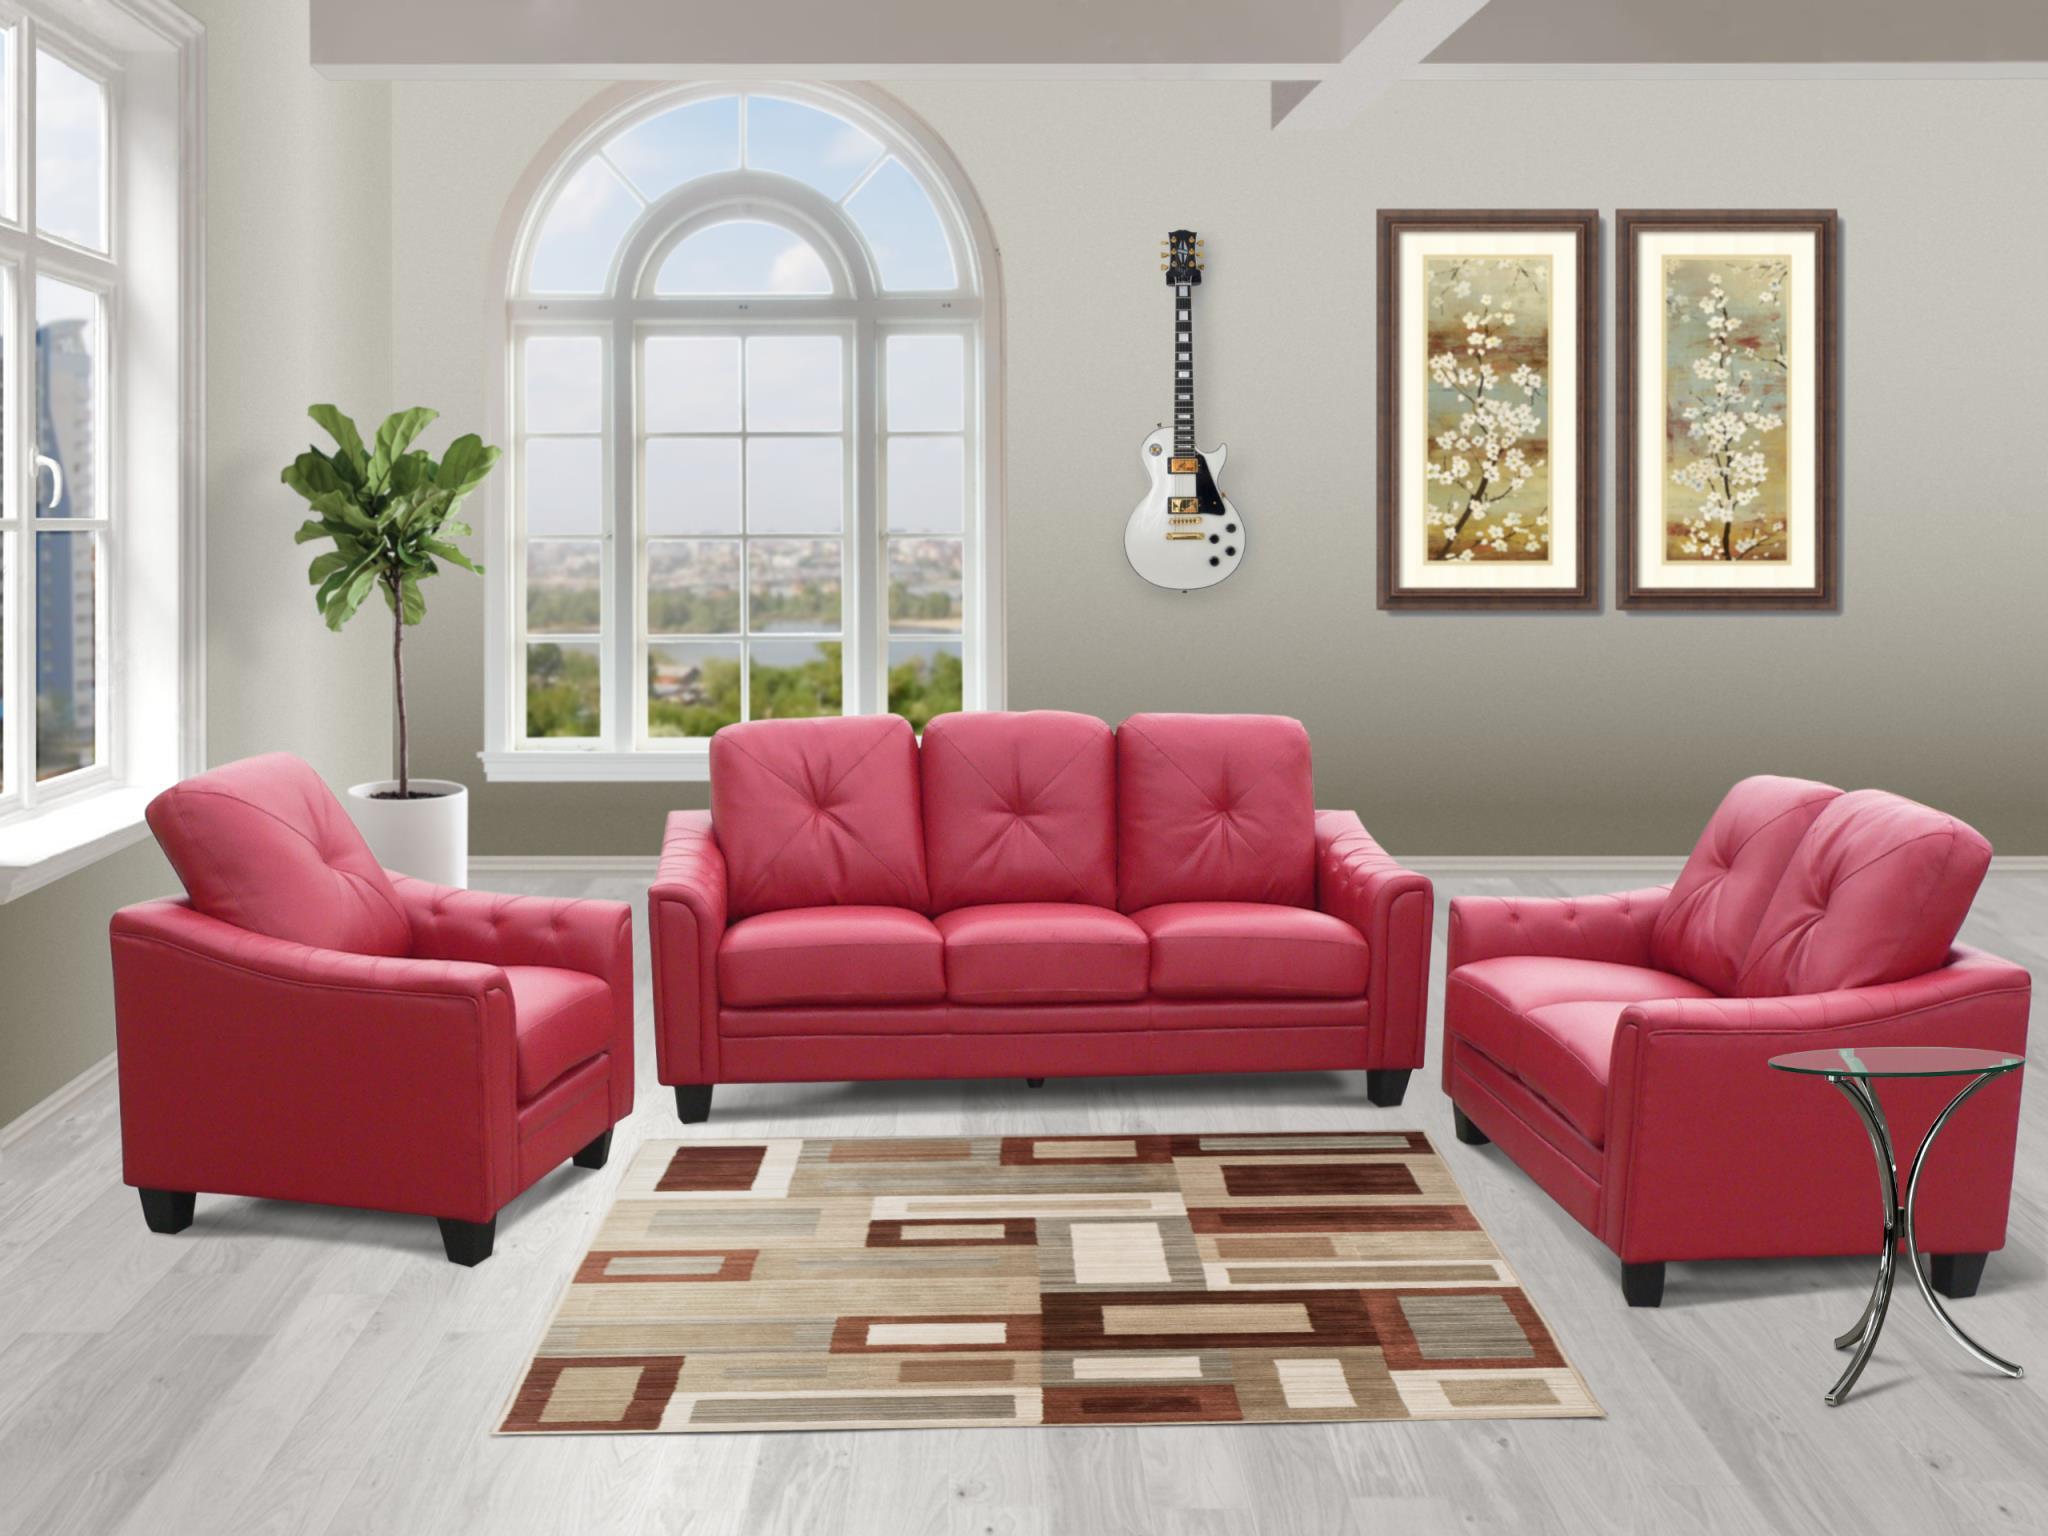 MYCO Furniture Walden Sofa Loveseat and Chair Set